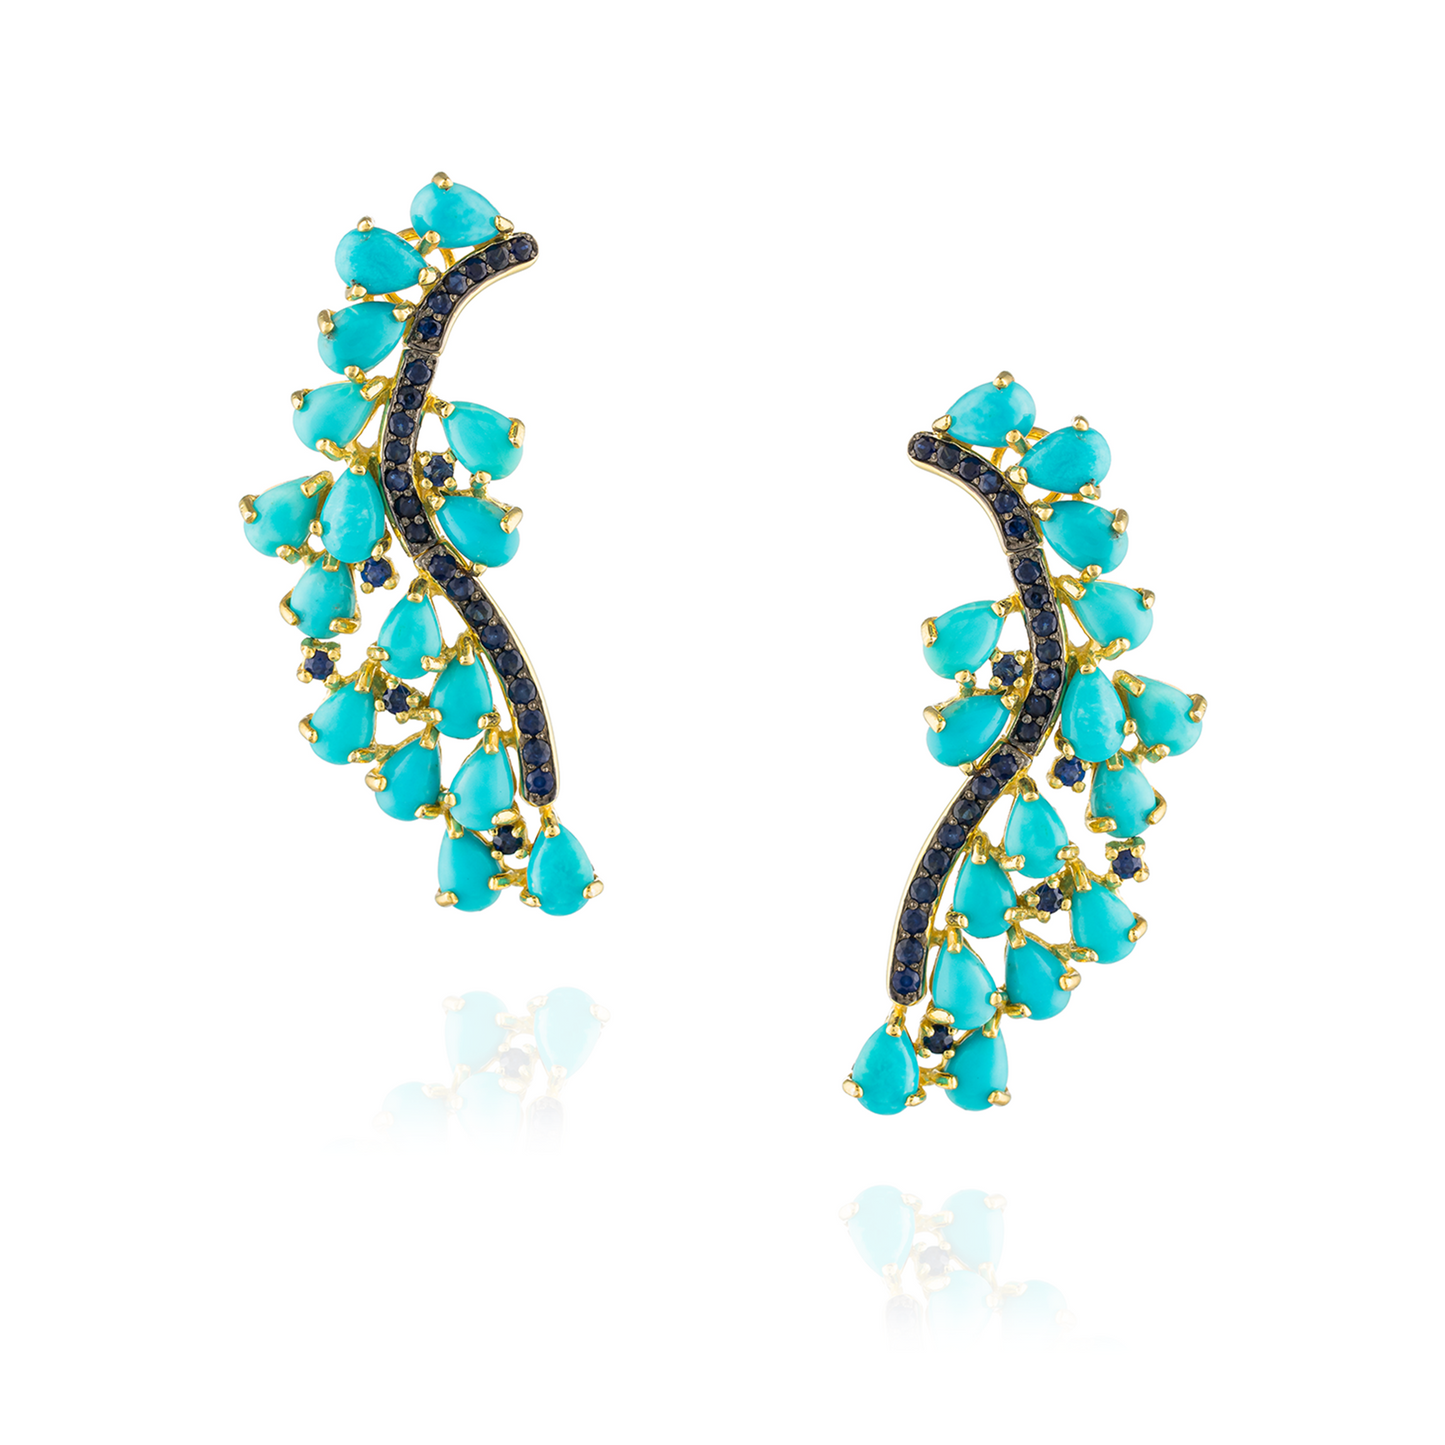 Load image into Gallery viewer, Floret 925 Silver Earrings Yellow Gold Plated with Turquoise Cabouchon and Blue Sapphires
